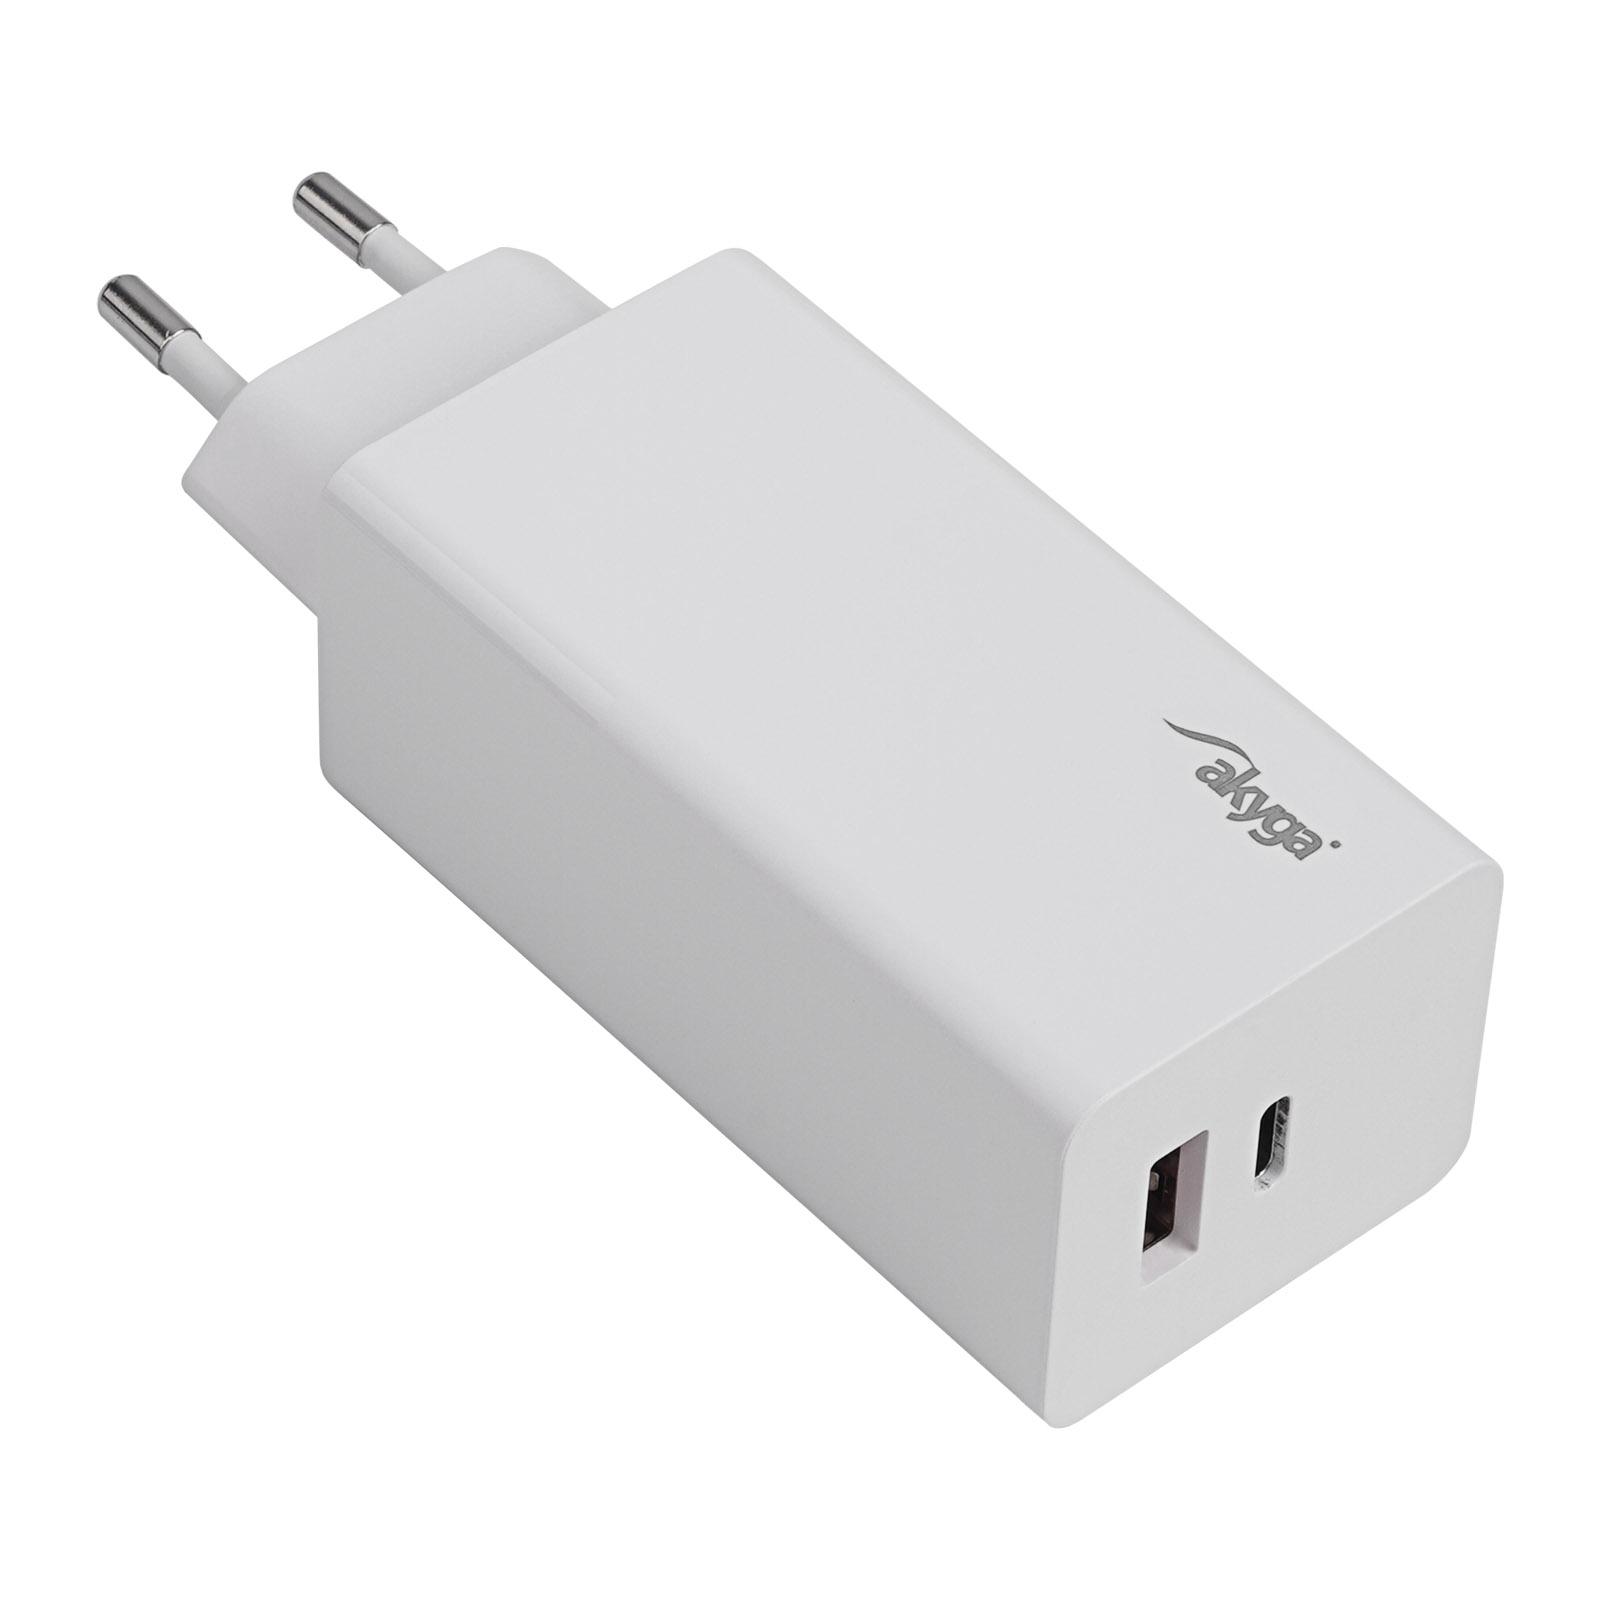 main_image Chargeur AK-CH-20 USB-A + USB-C PD 5-20V / max. 5A 100W Quick Charge 3.0 GaN